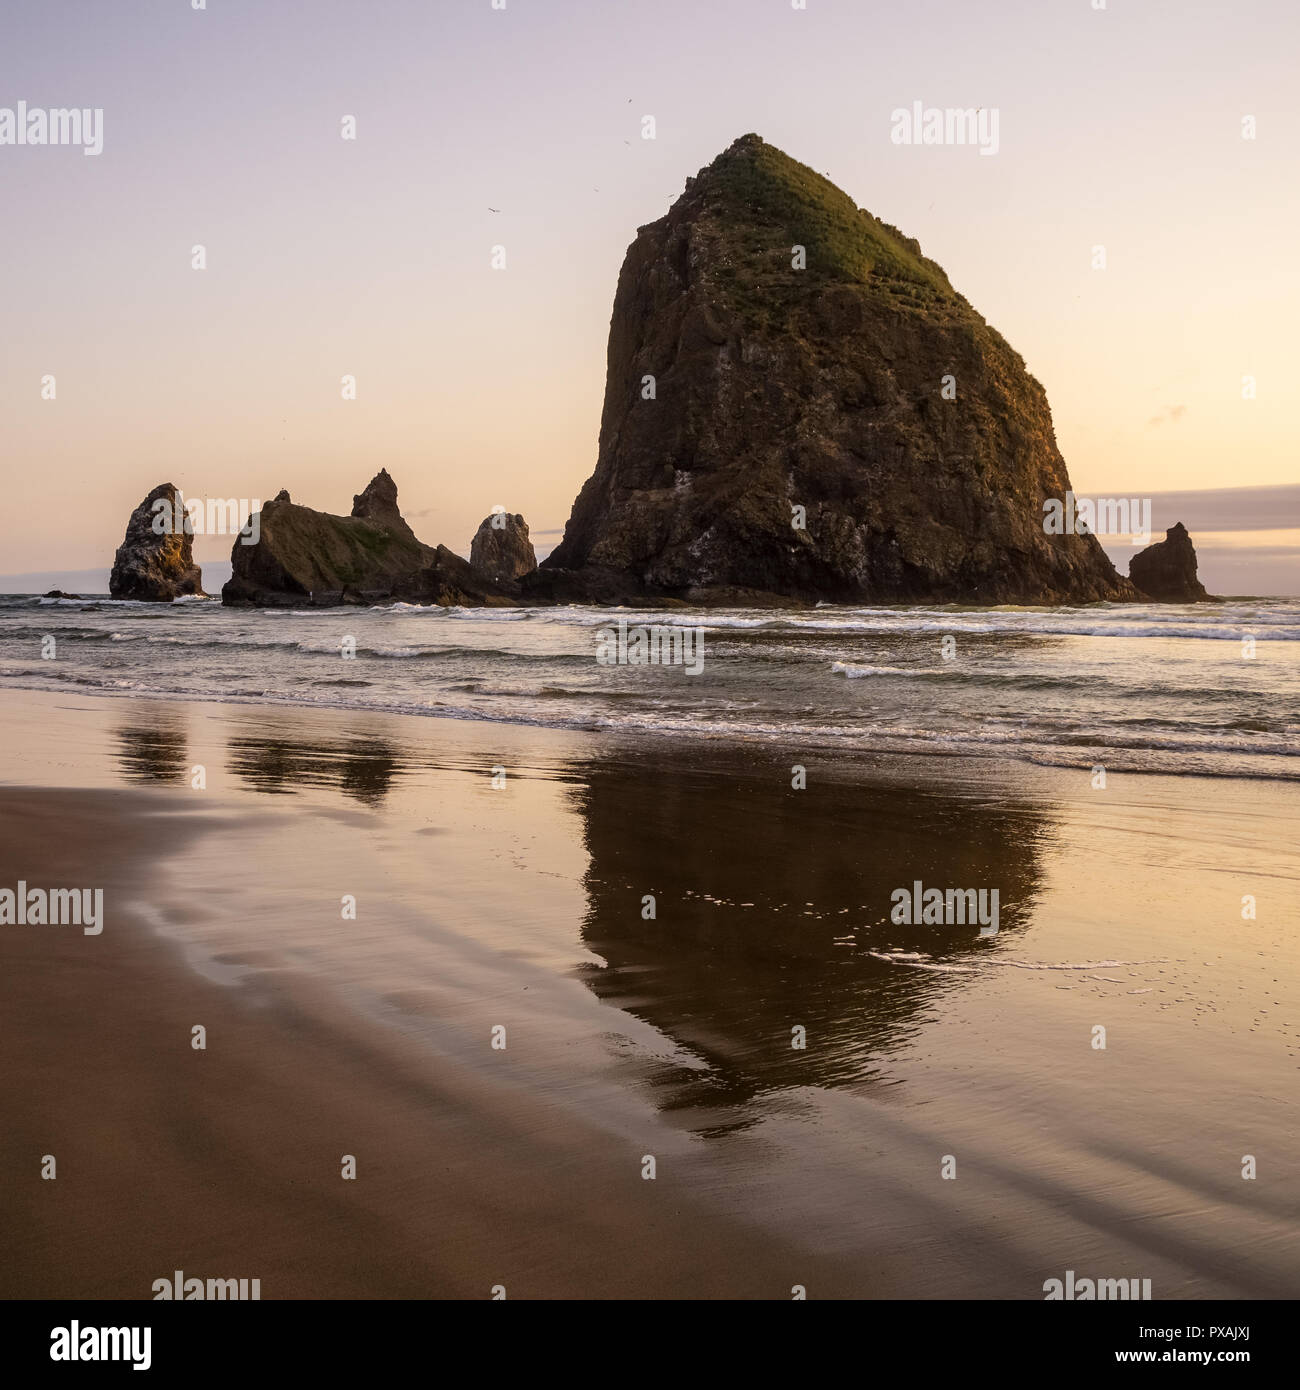 The Haystack Rock at dusk, iconic sea stack or rocky outcrop of the Pacific Coast, Cannon Beach, Oregon, USA. Stock Photo